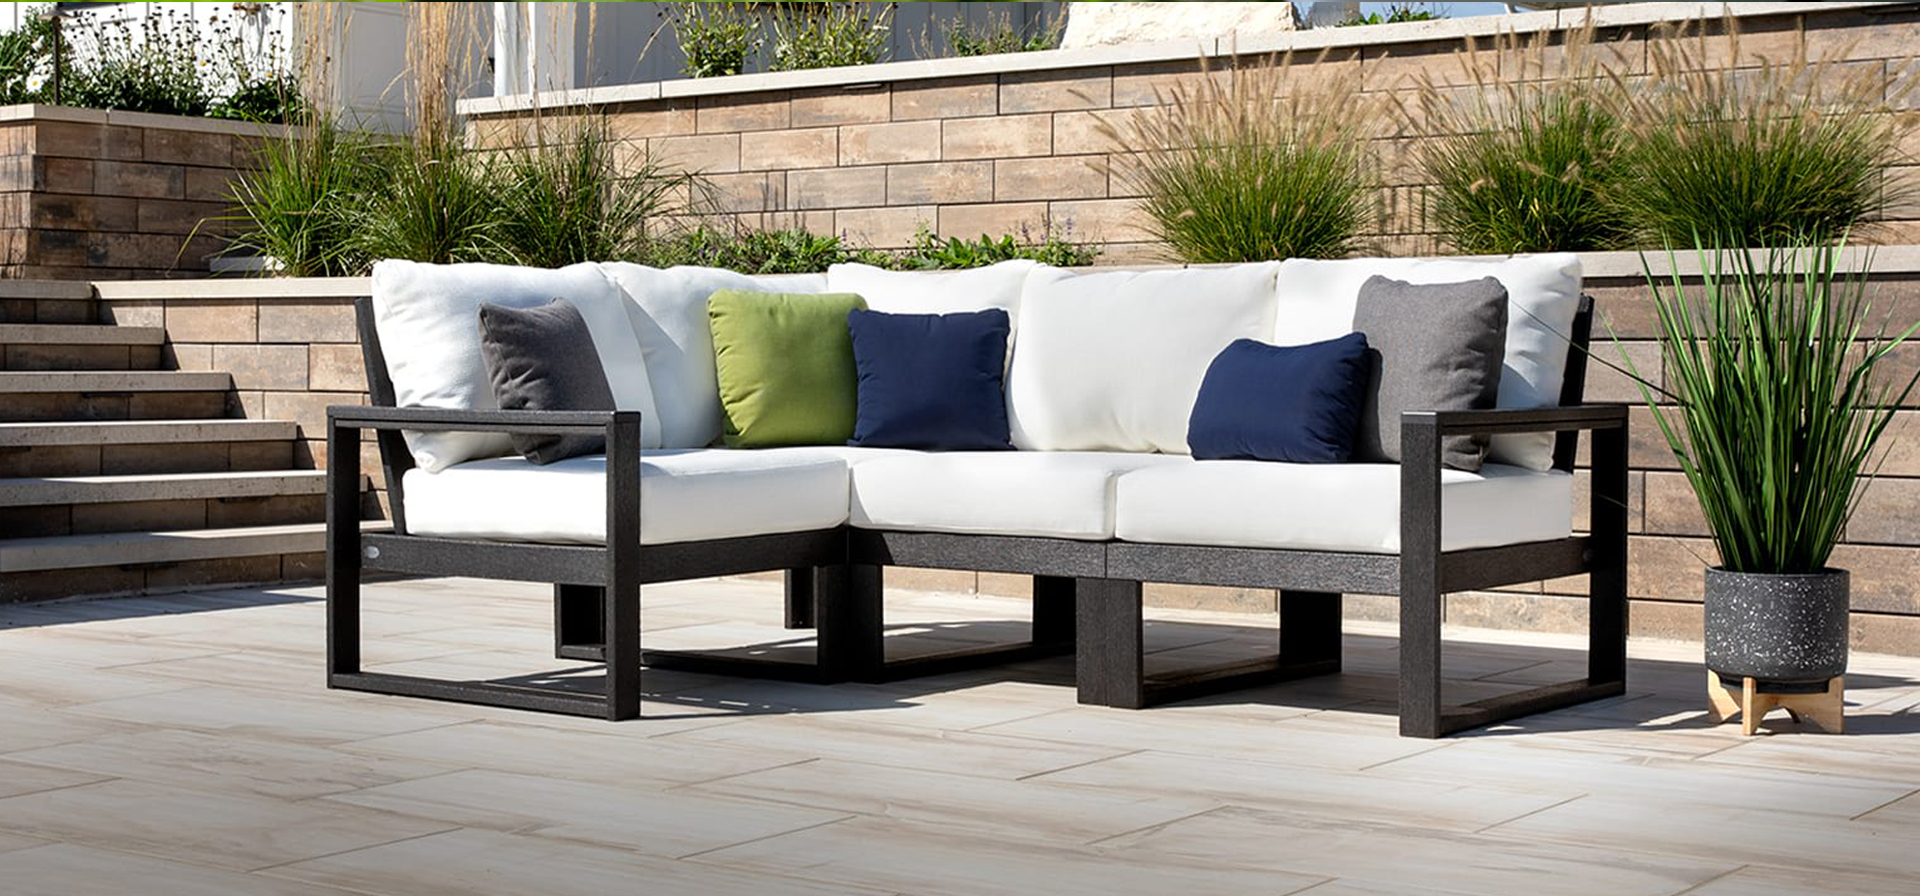 Polywood Hdpe Outdoor Patio Furniture Collection All American Outdoor